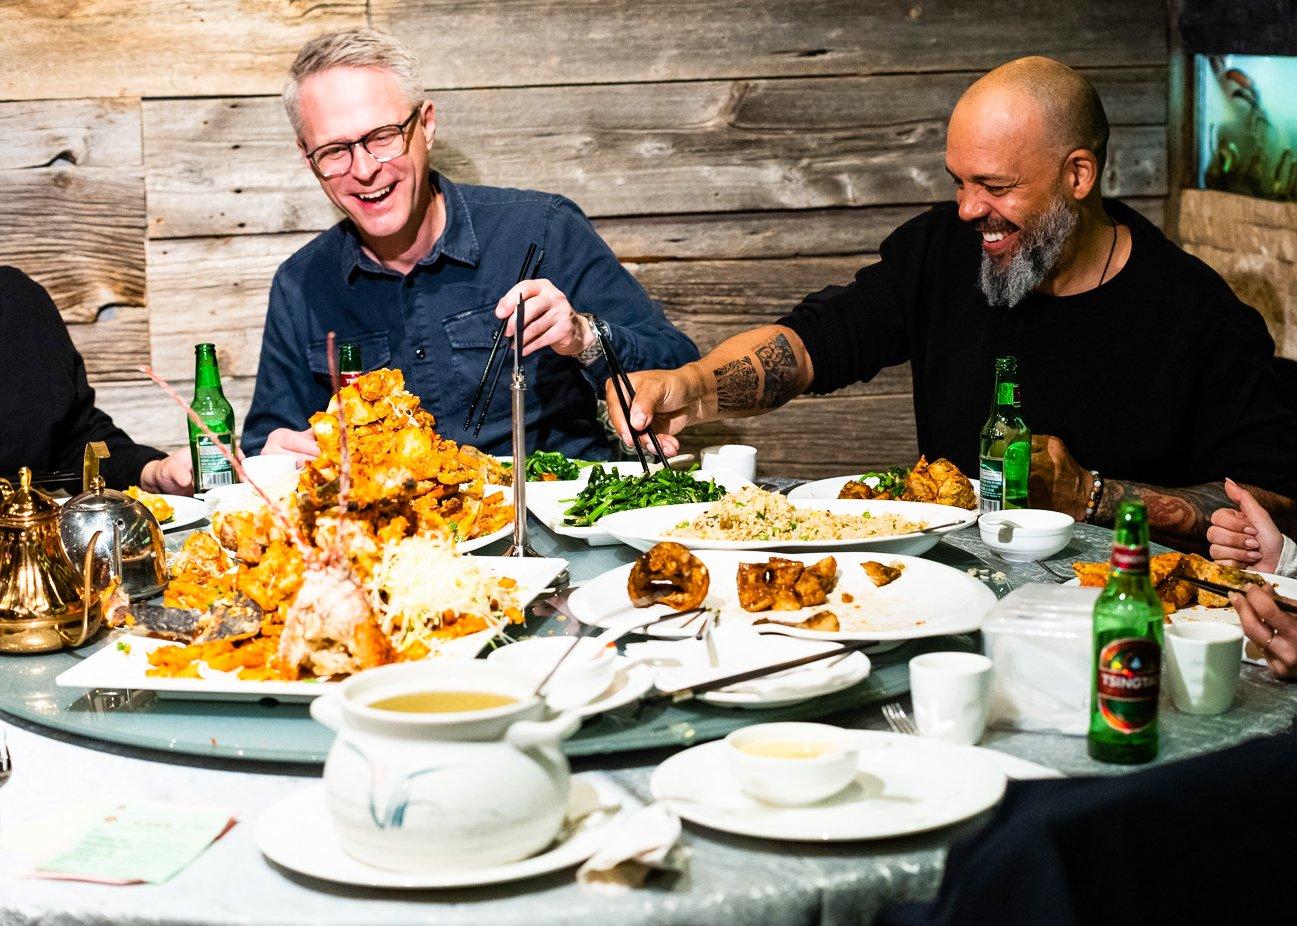 Nuttall-Smith and friends feasting on Hong Kongâstyle lobster at Fishman Lobster Clubhouse, a Chinese party spot in Scarborough, Ontario